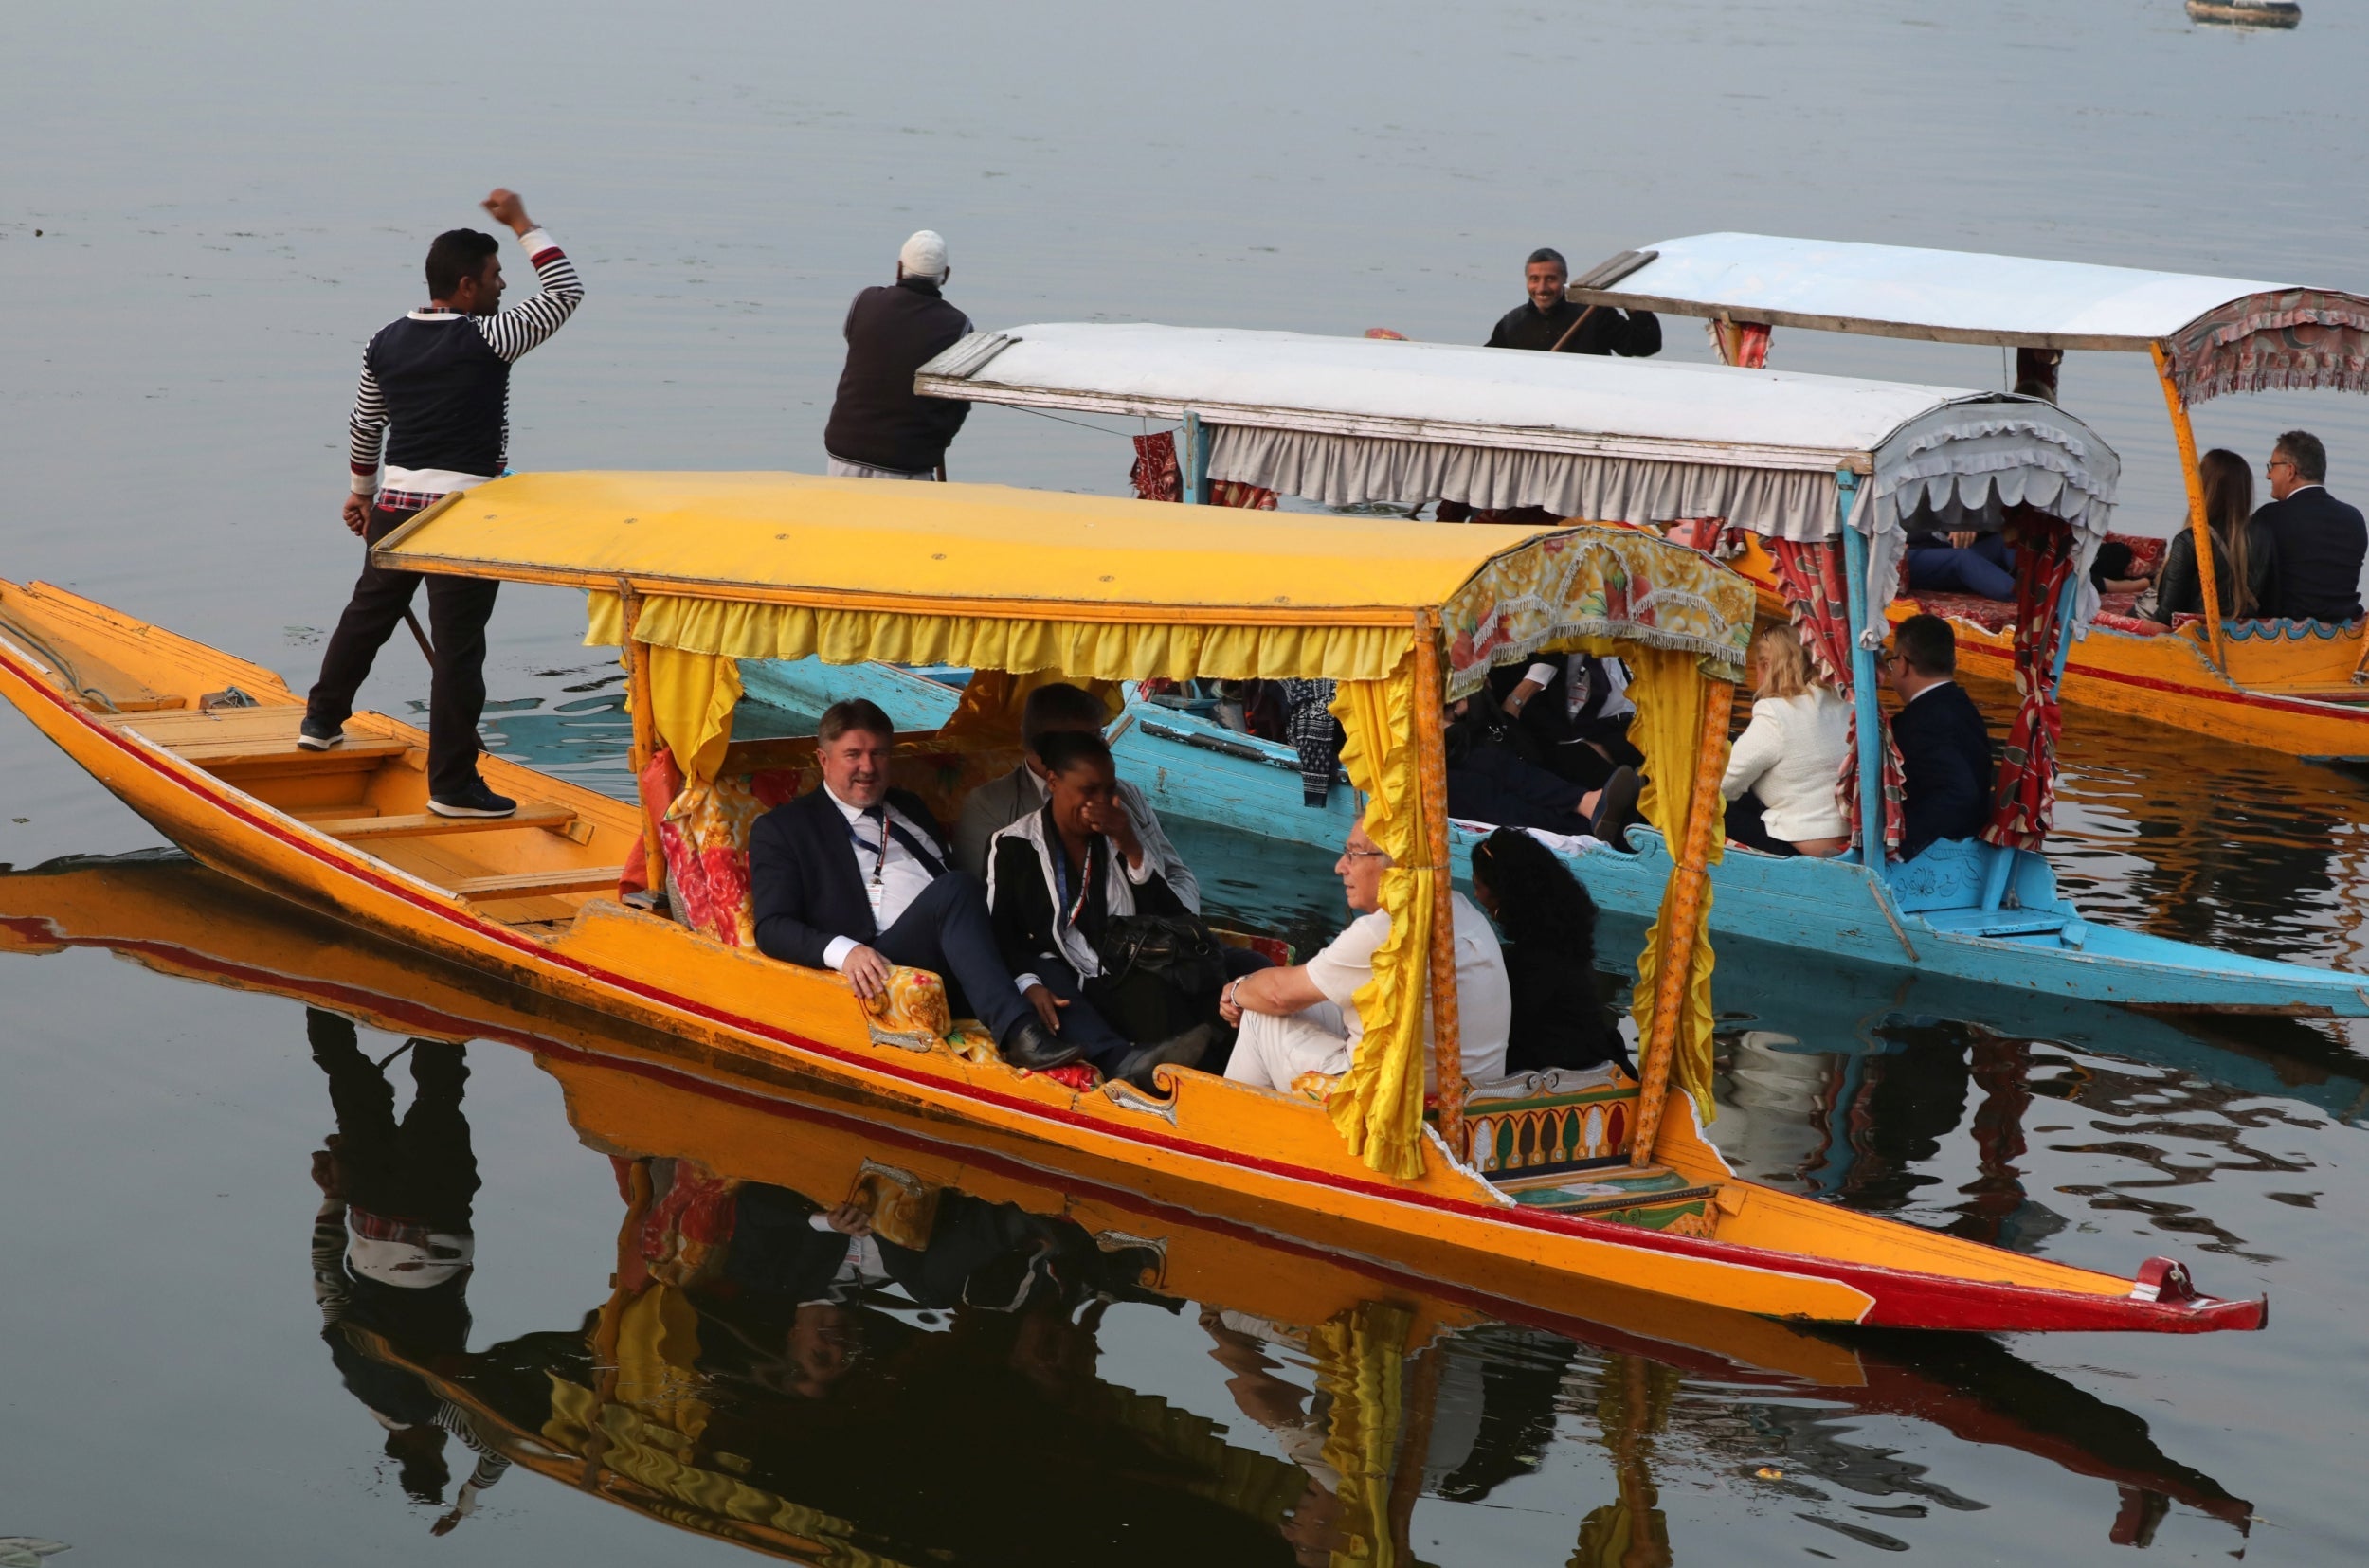 Members of European parliament enjoyed a boat ride on Dal Lake in Srinagar on Tuesday